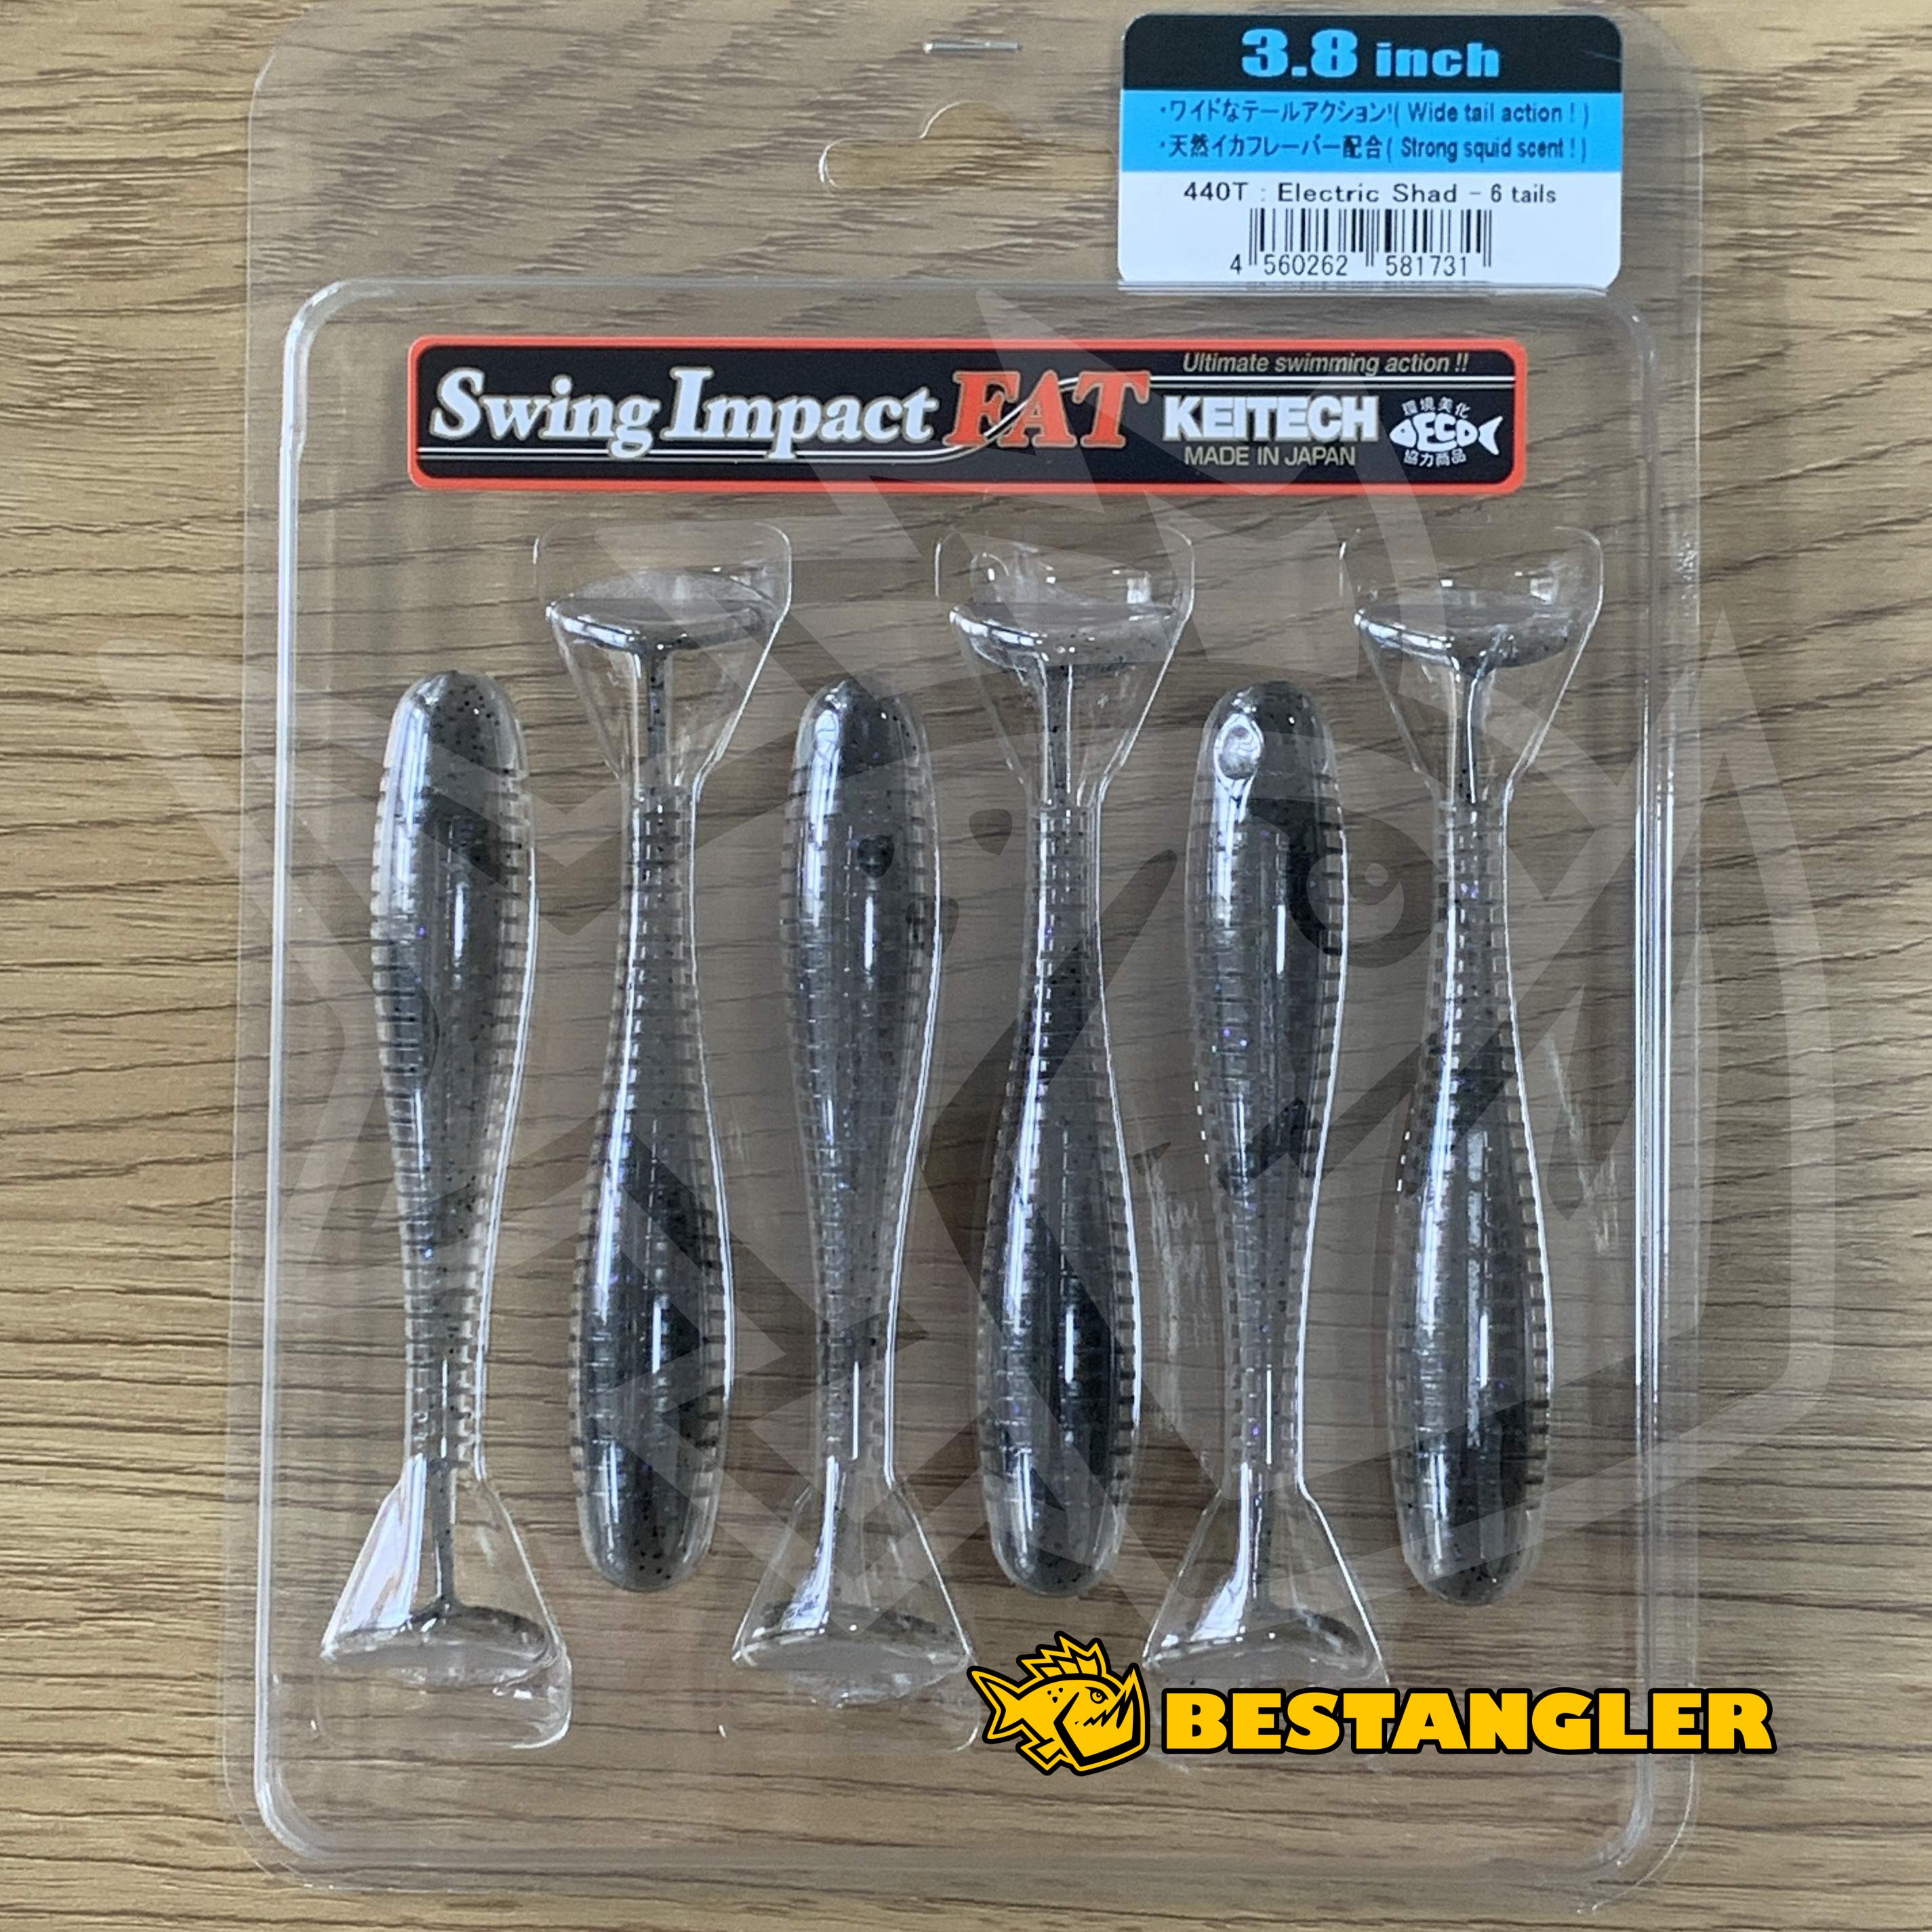 Keitech FAT Swing Impact 3.8 Electric Shad